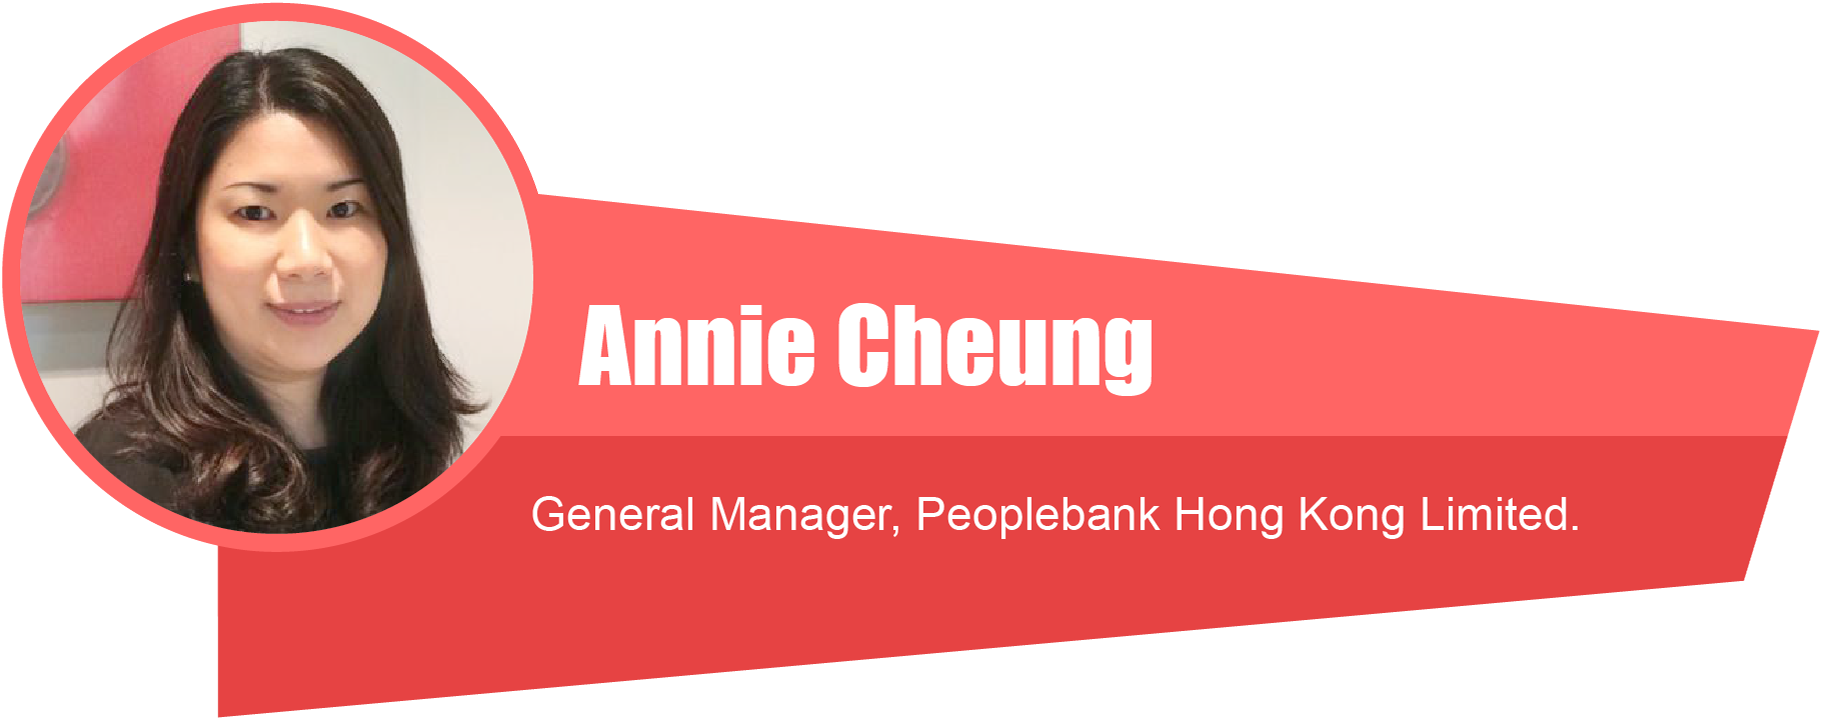 Annie Cheung - General Manager, Peoplebank Hong Kong Limited